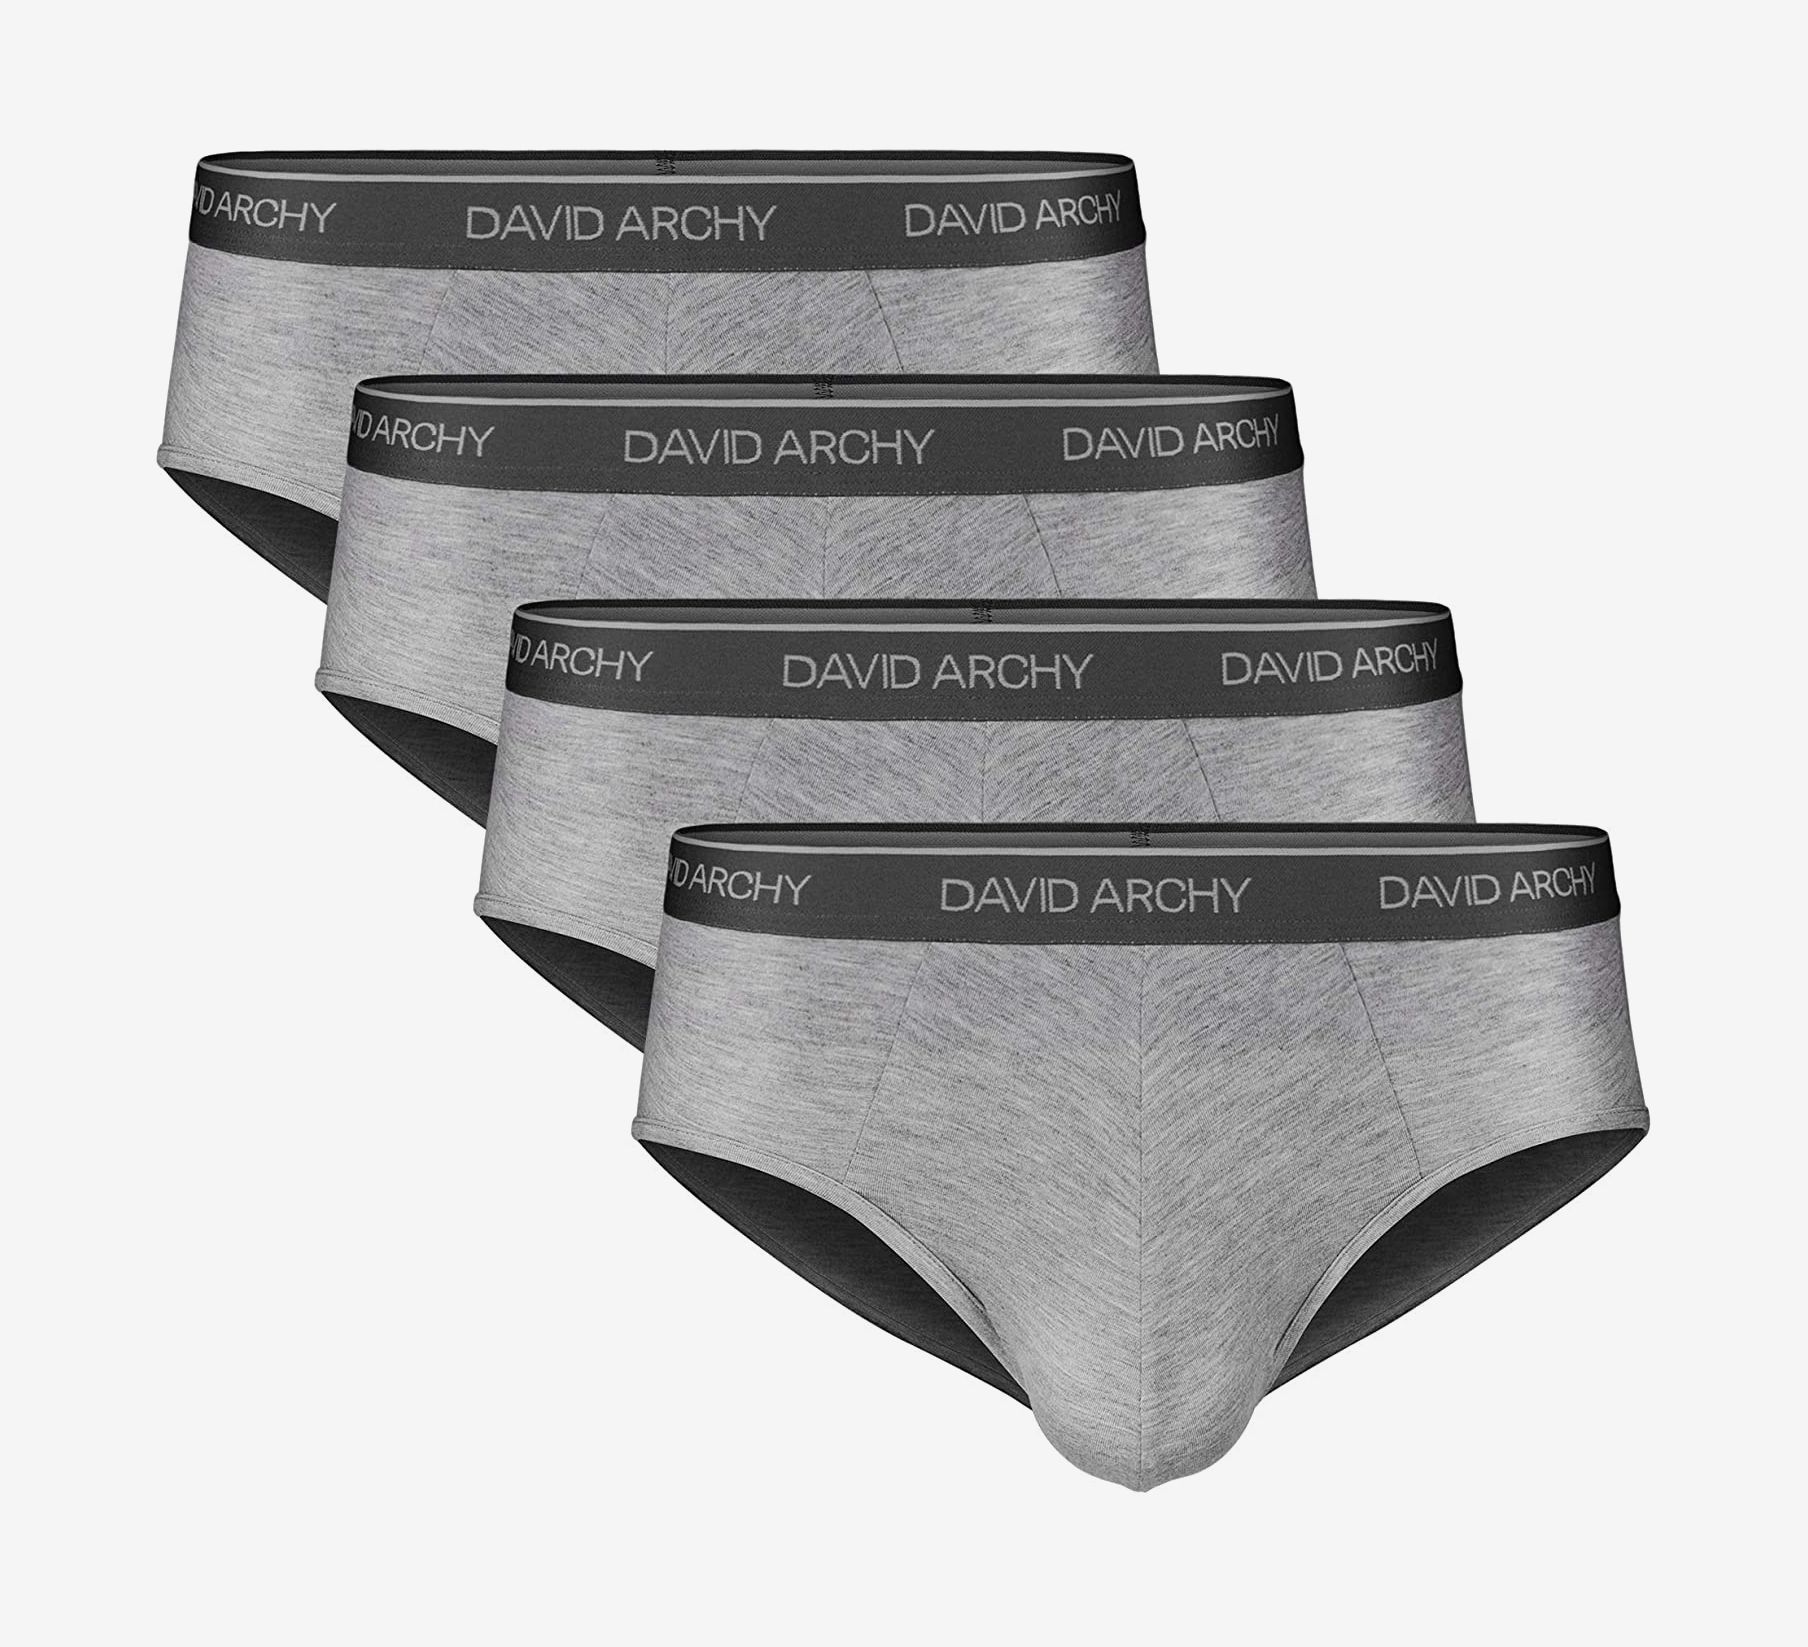 What You Need to Know About Men's Luxury Underwear - GREY Journal